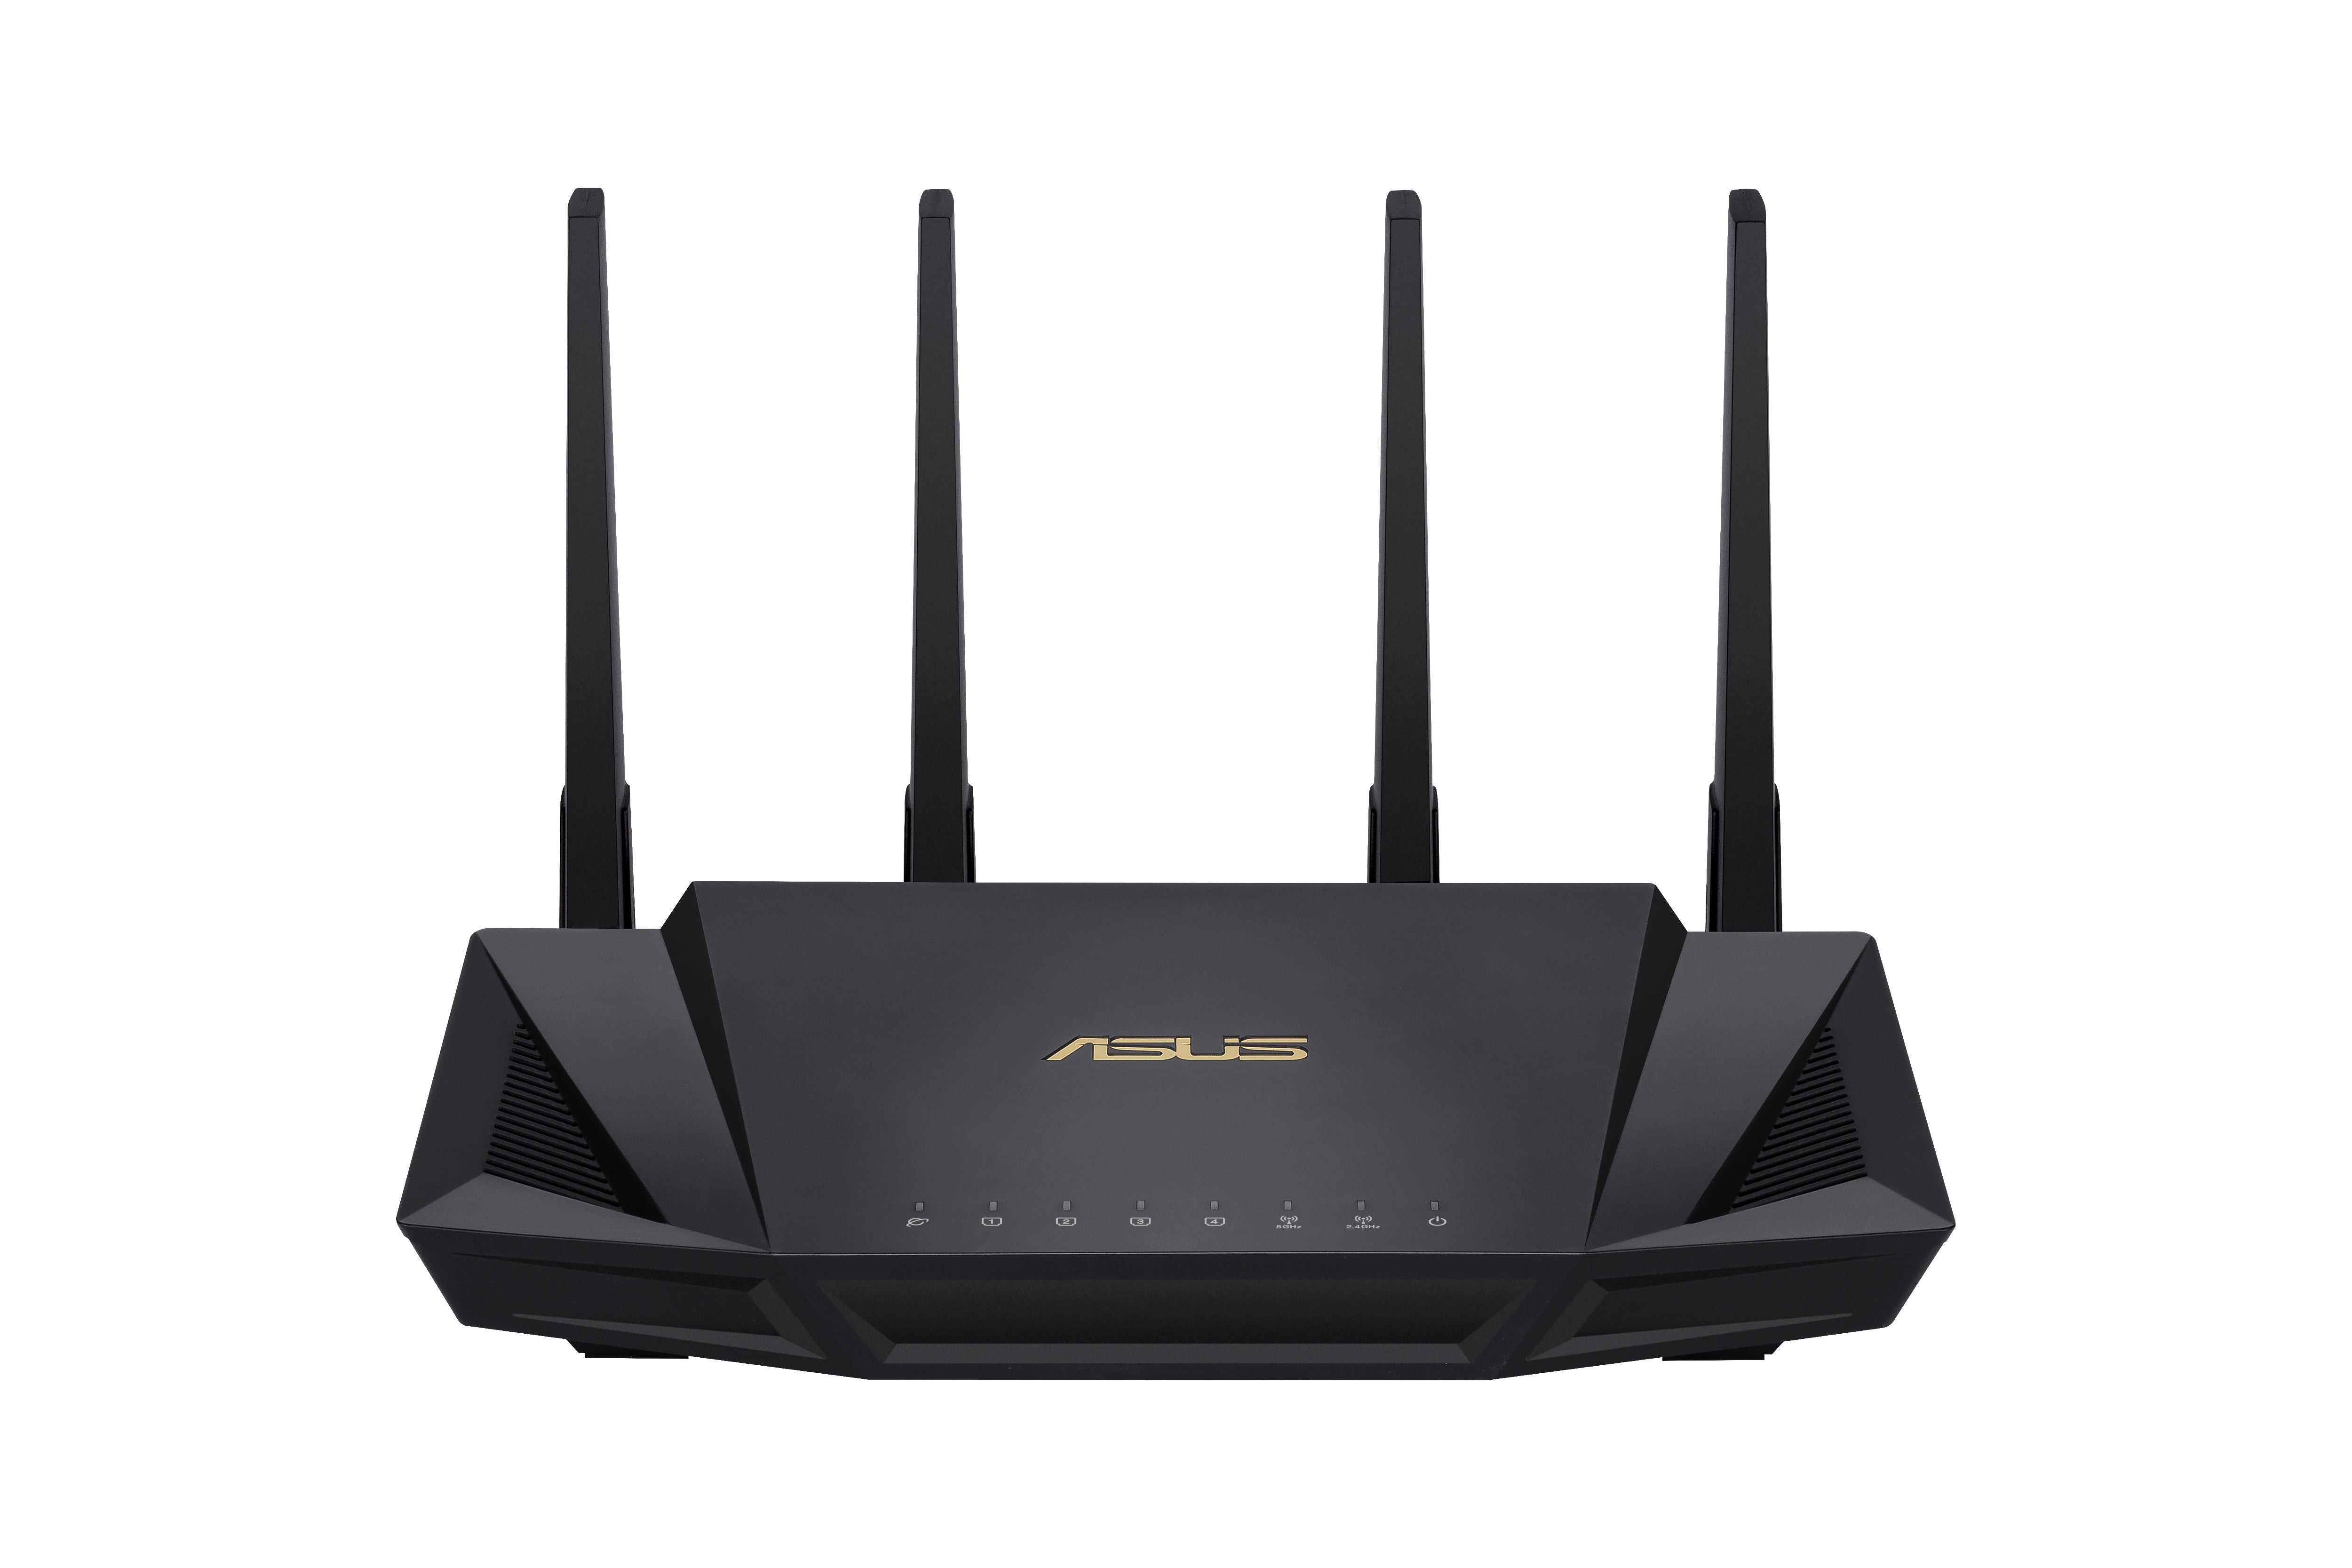 ASUS, Dual Band Wifi Router Wifi 6,Support Aimesh Whole-Home Wifi 4X1G